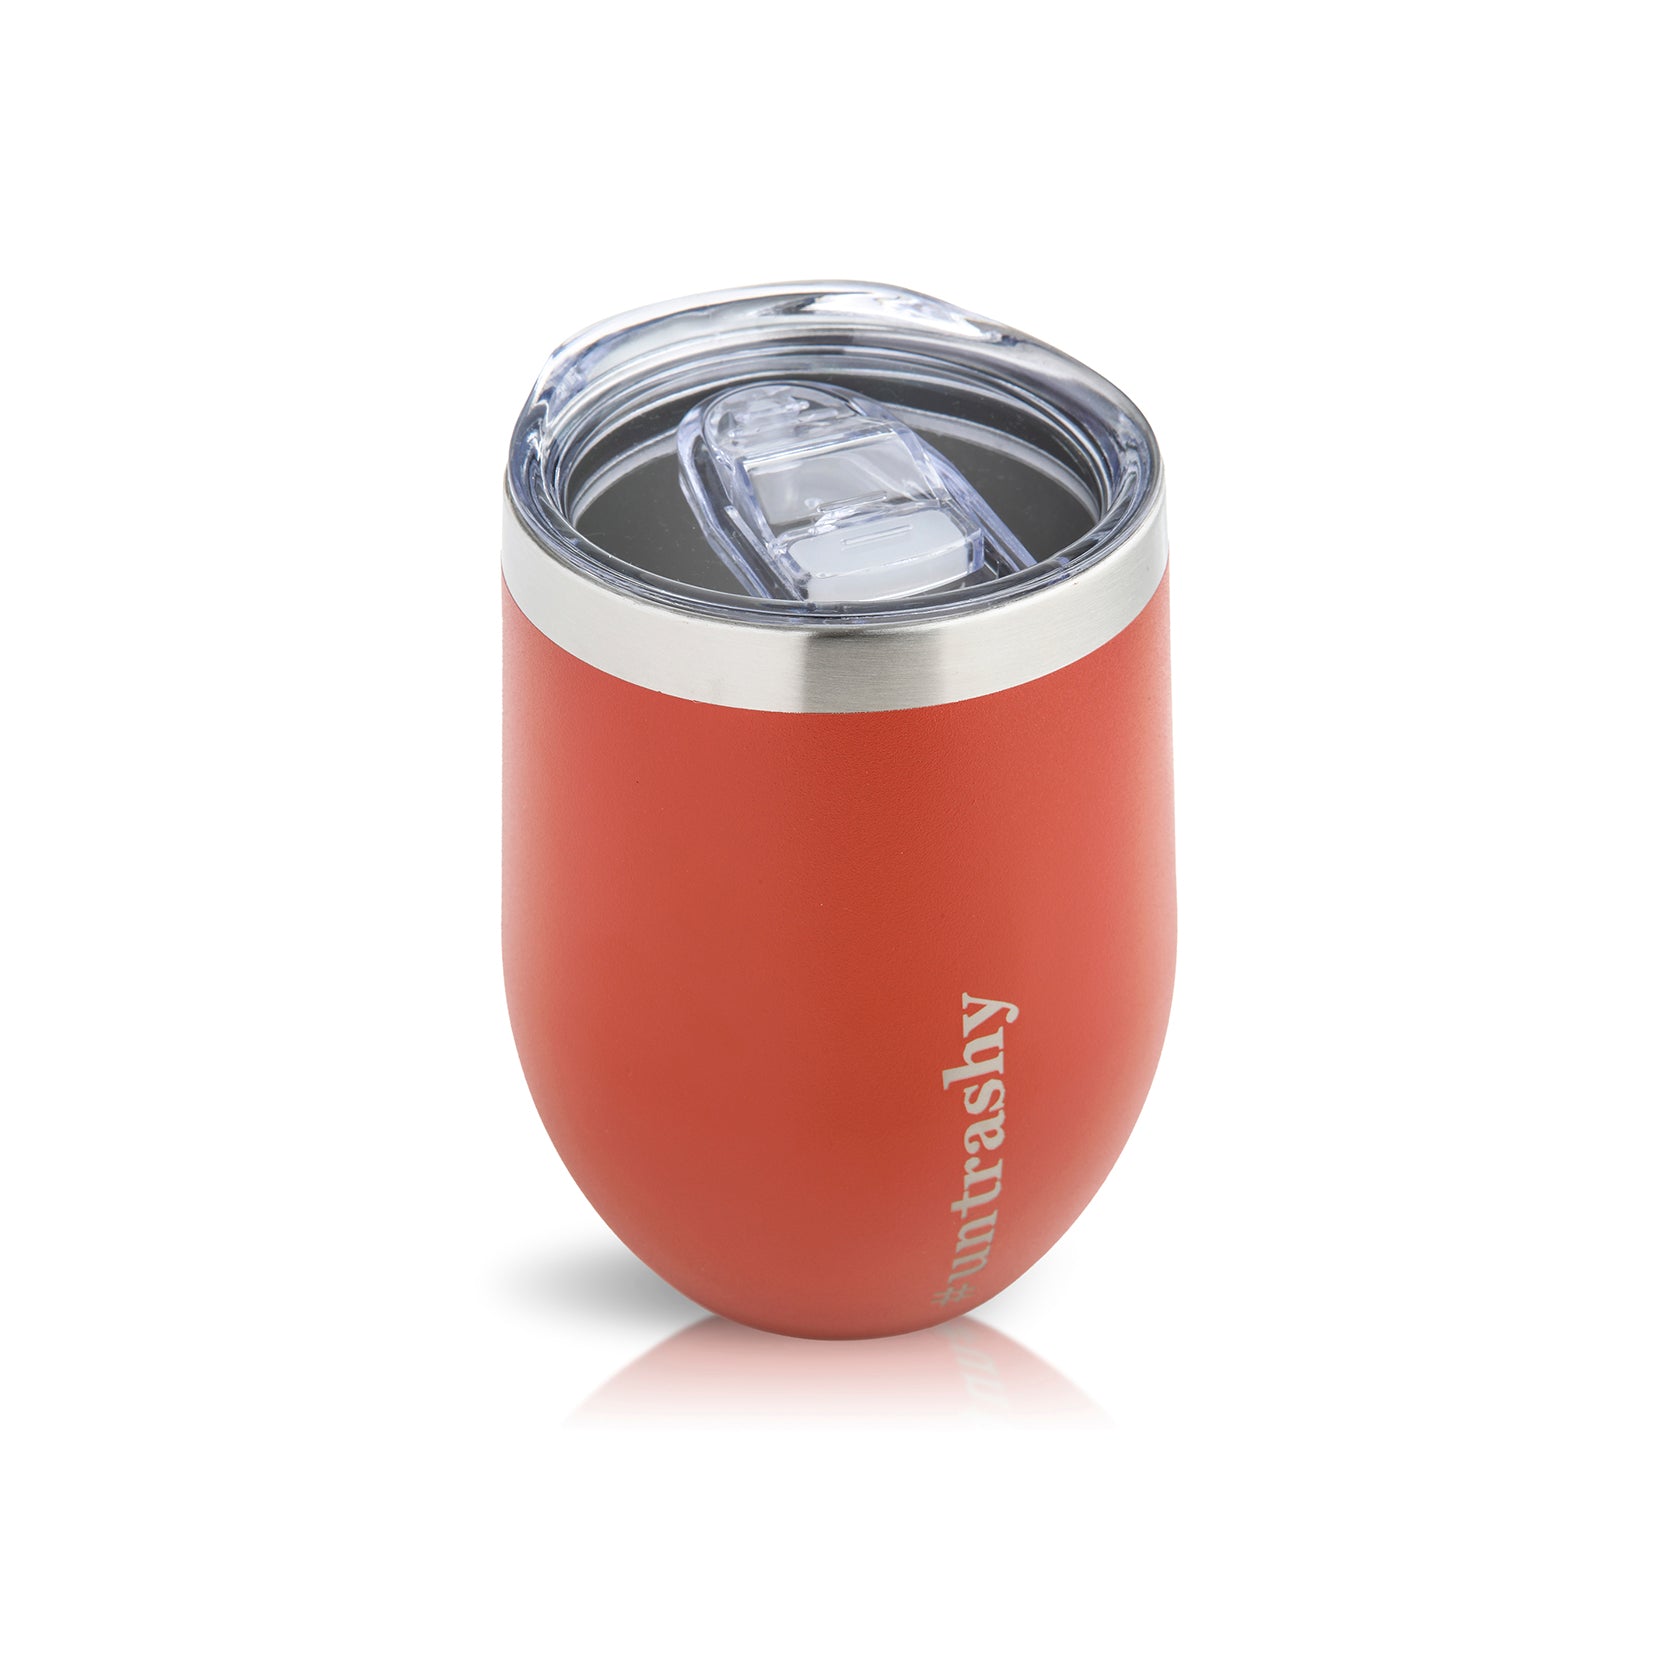 Orange coloured coffee or wine cup with lid on a white background